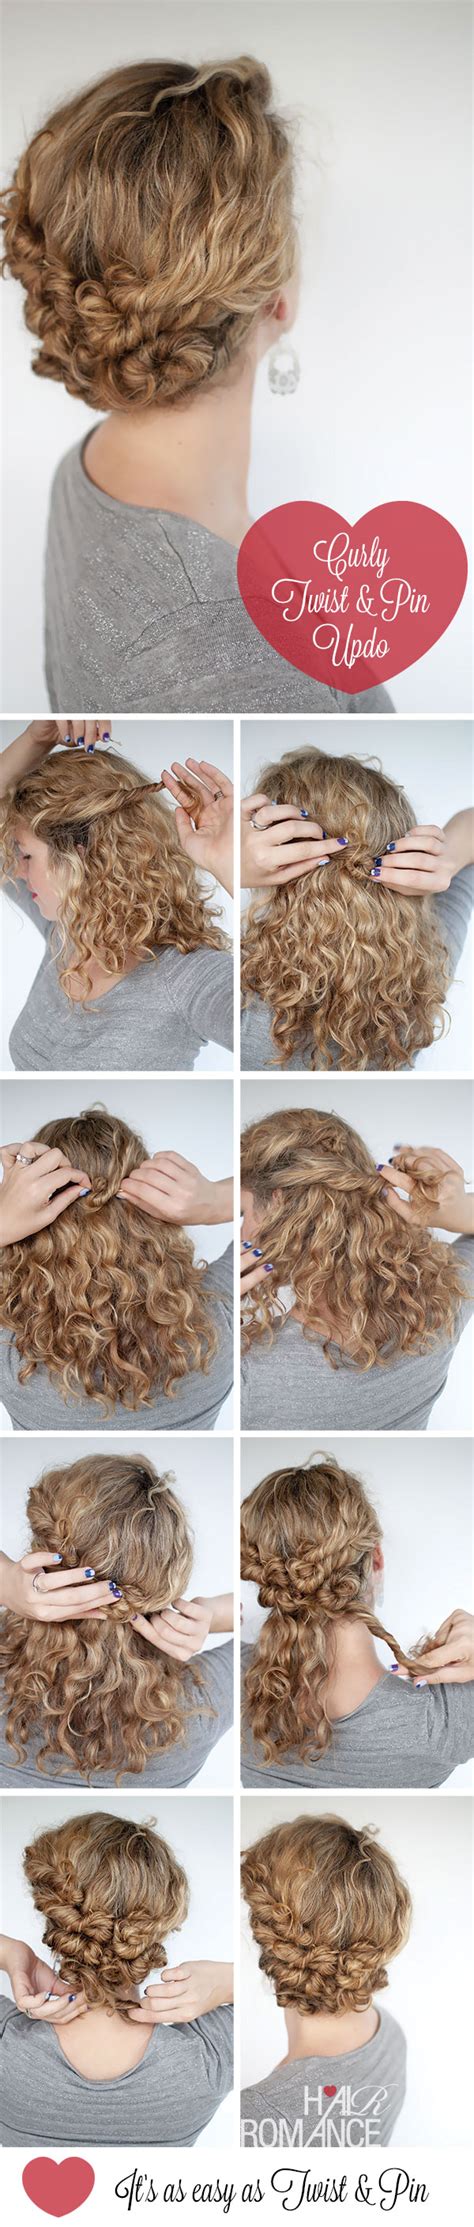 hairstyle tutorial easy twist and pin updo for curly hair hair romance